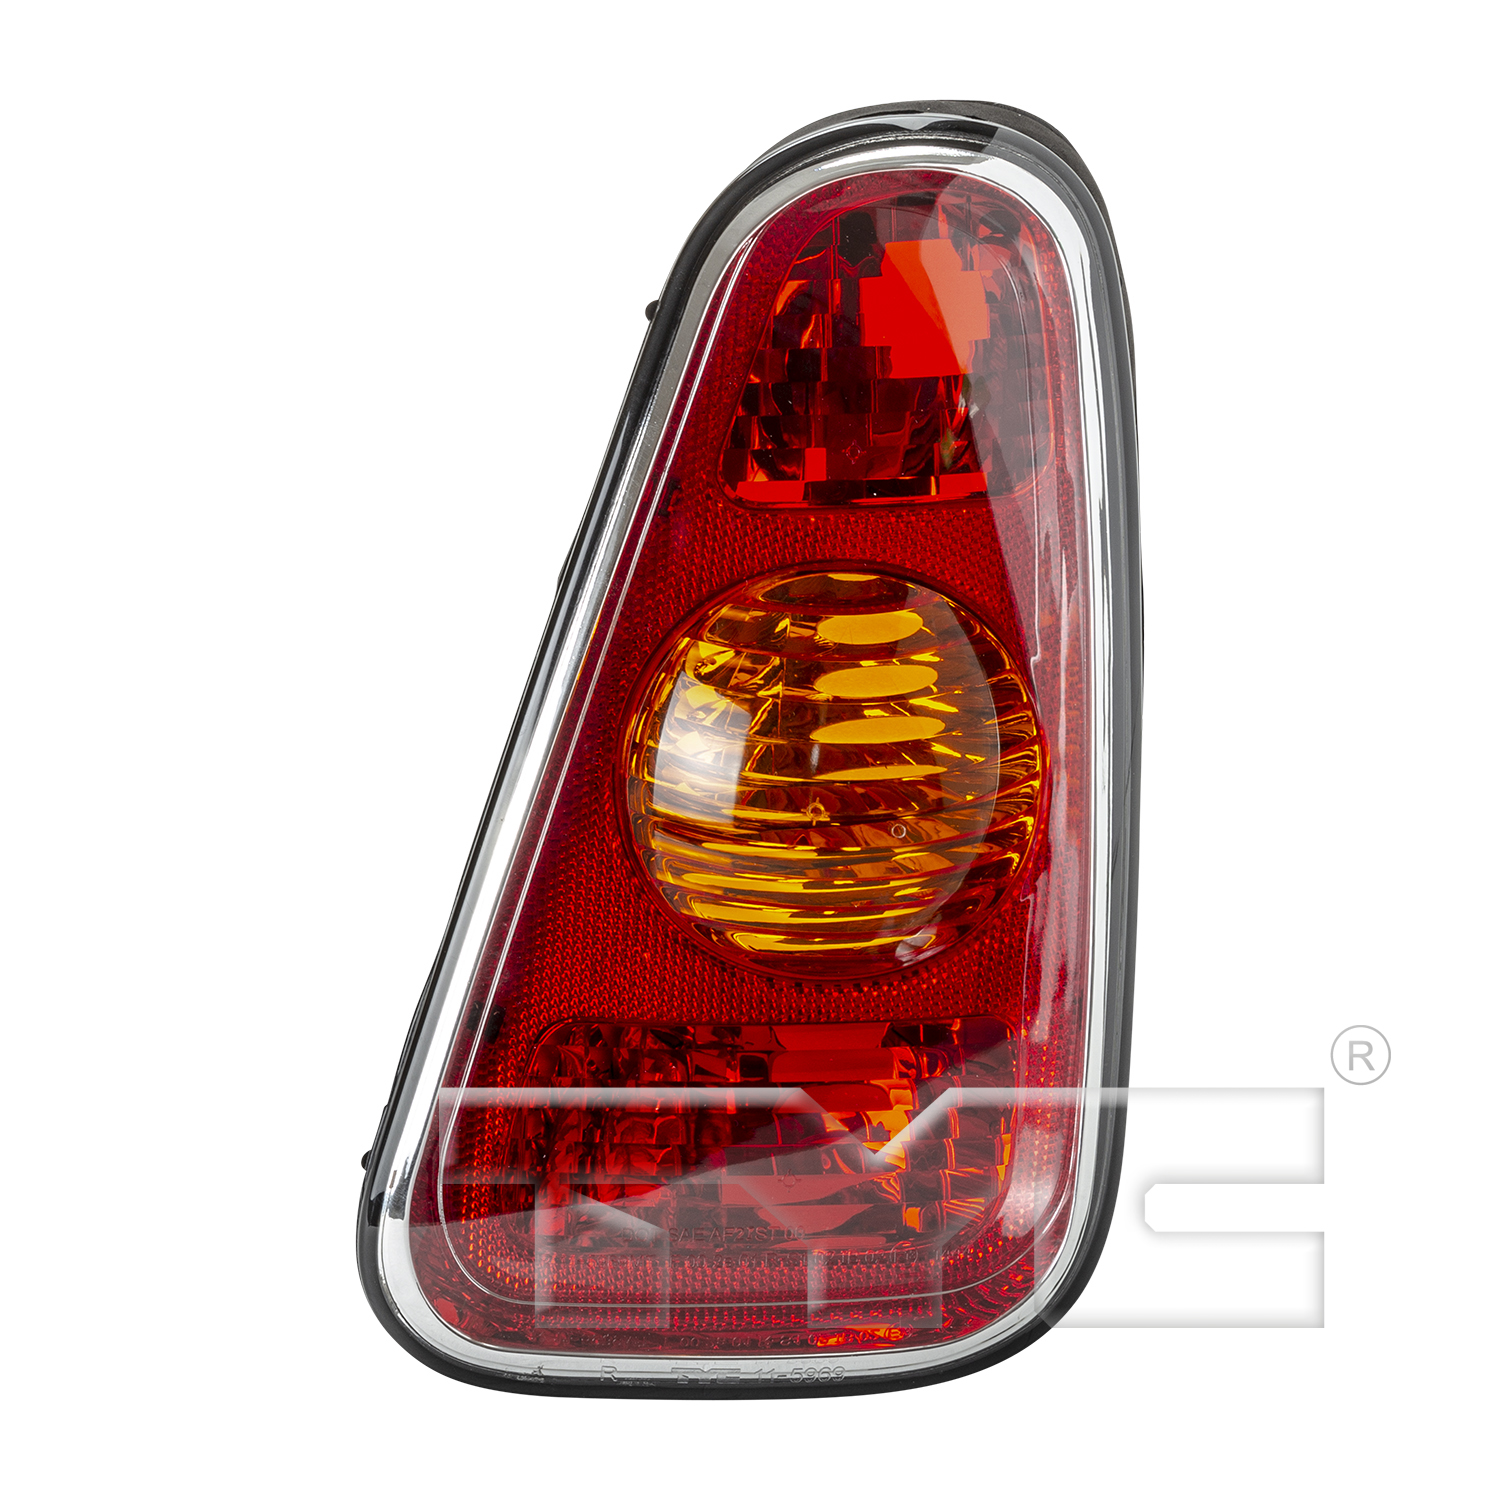 Aftermarket TAILLIGHTS for MINI - COOPER, COOPER,02-06,RT Taillamp assy